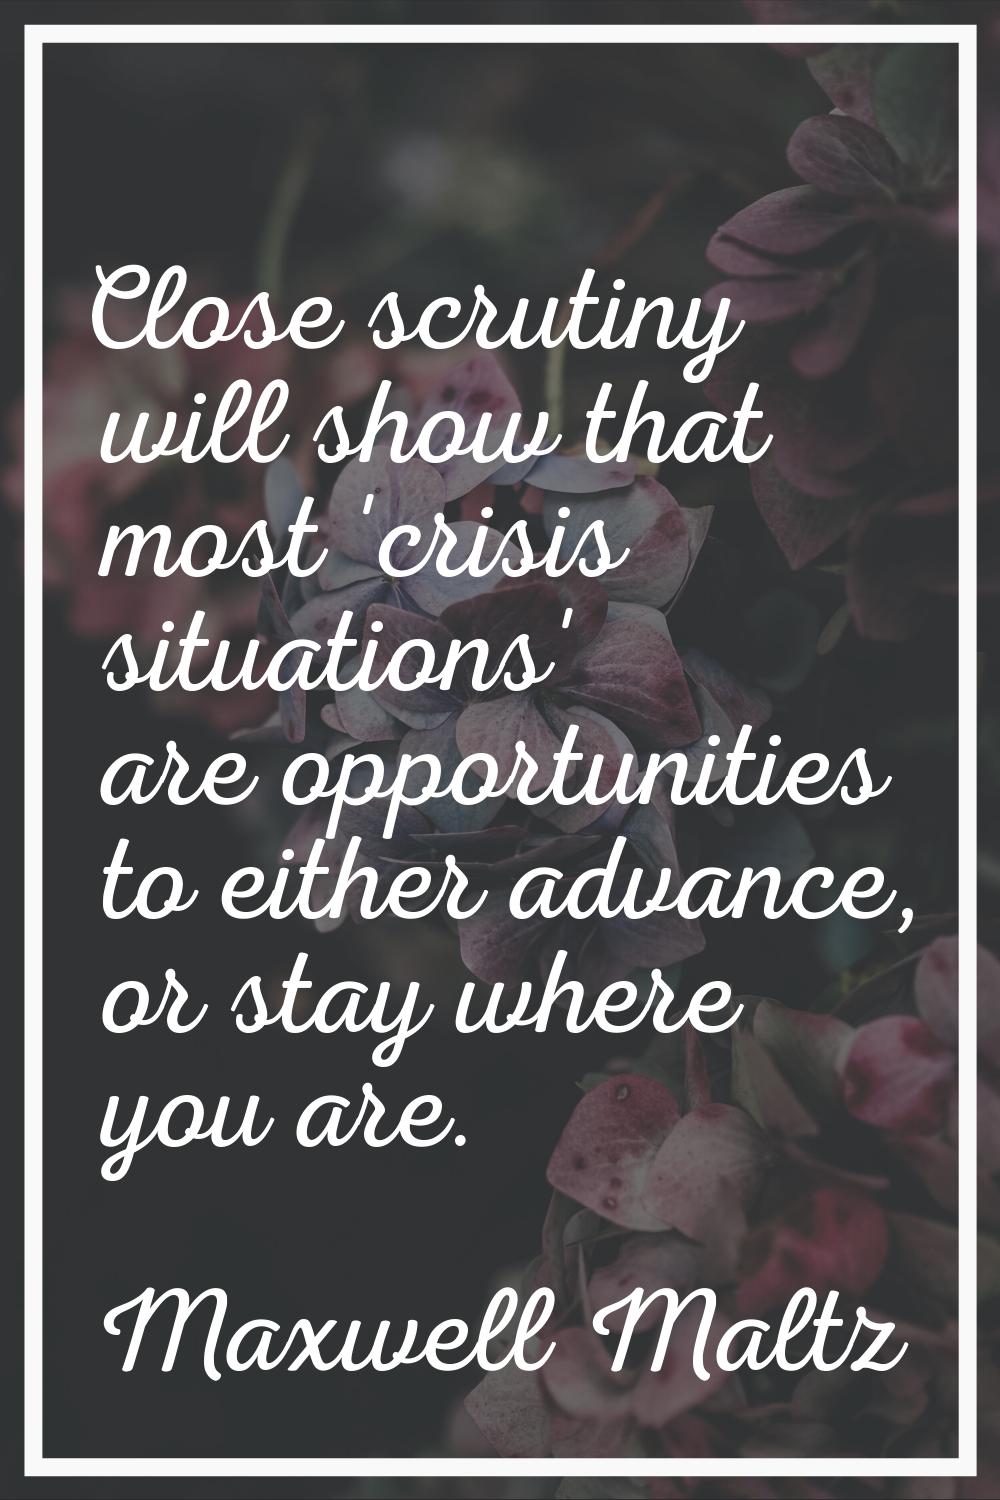 Close scrutiny will show that most 'crisis situations' are opportunities to either advance, or stay